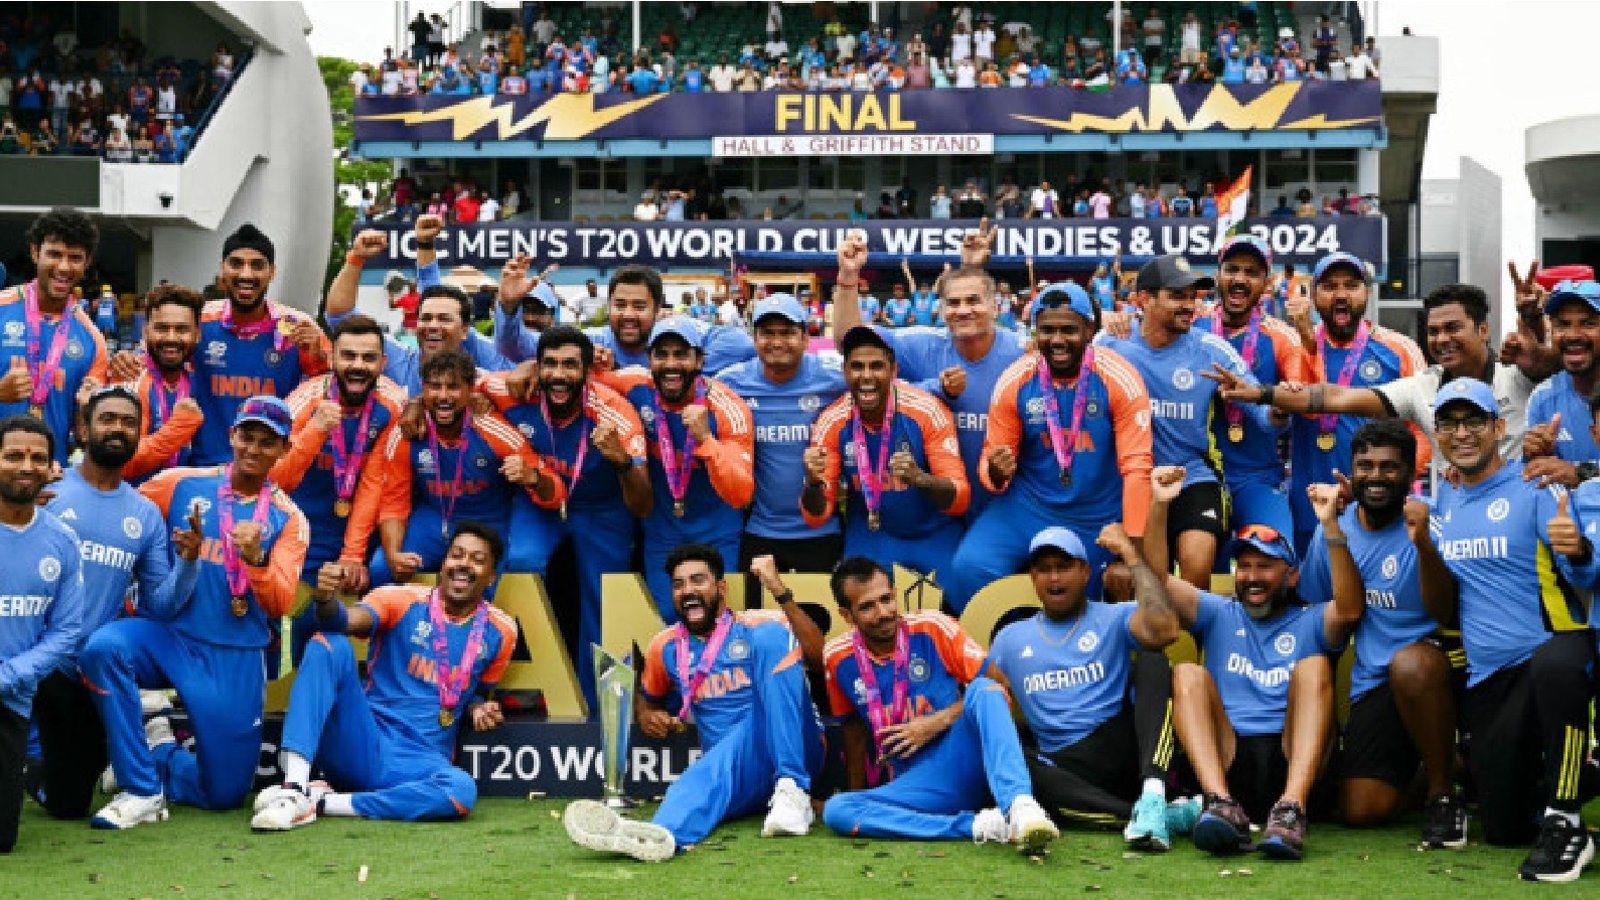 India win the T20 World Cup